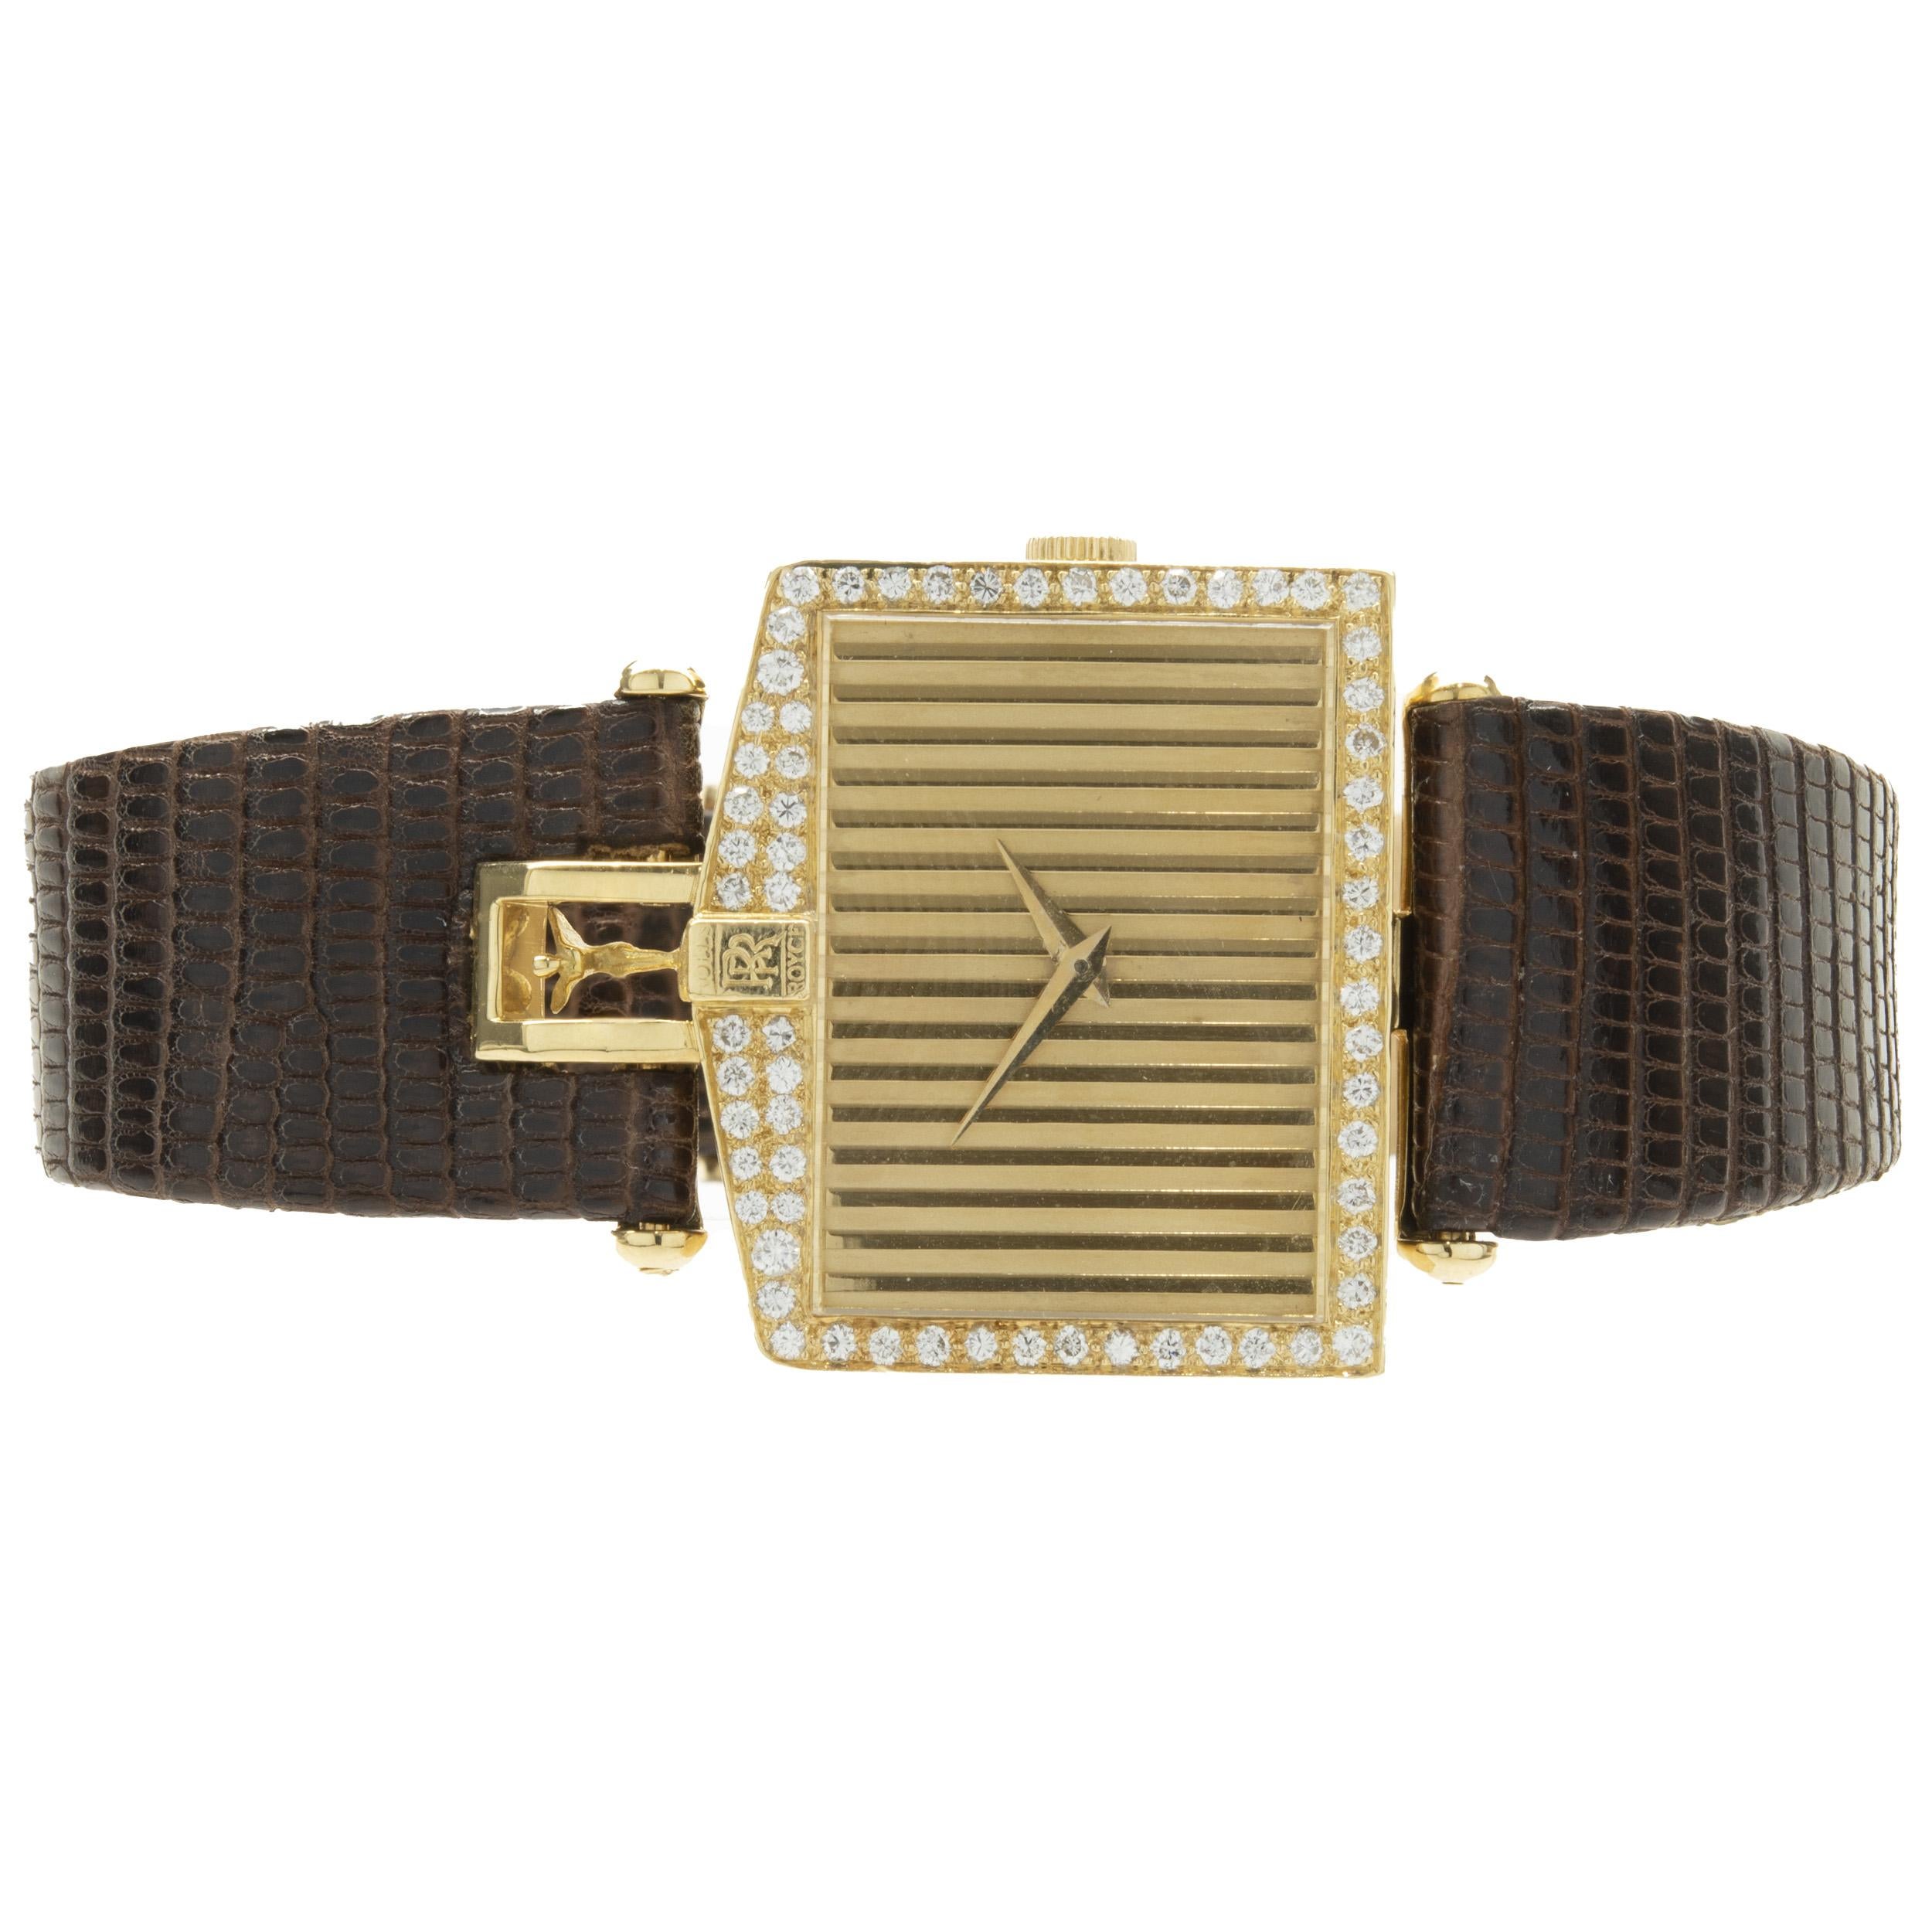 Movement: manual
Function: hours, minutes
Case: 33 x 29mm 18K yellow gold rectangular case, sapphire crystal, push/pull crown, diamond bezel
Band: brown lizard strap, Corum buckle
Dial: champagne “Rolls-Royce” grill dial
Serial #: 327XXX
Reference